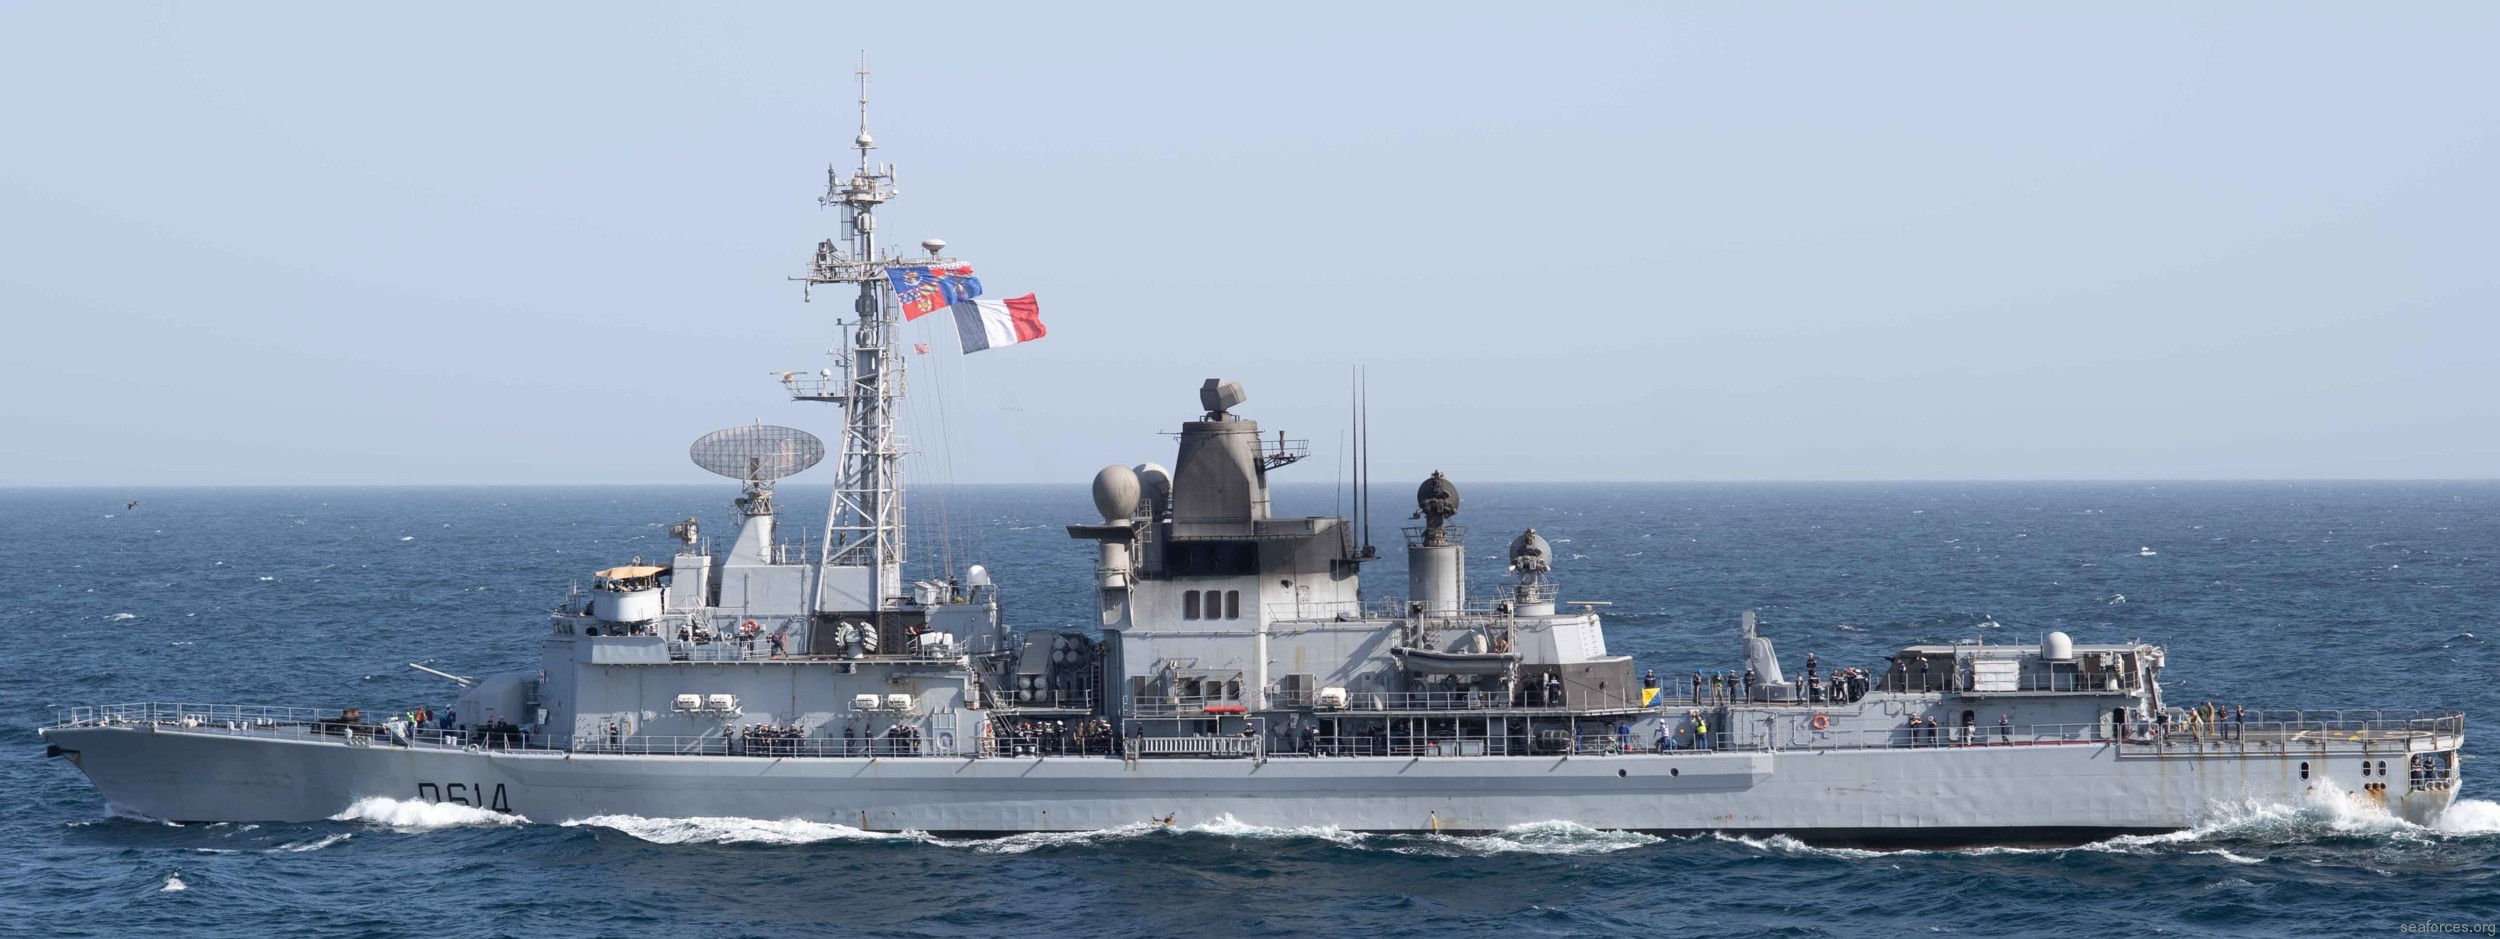 d-614 fs cassard f70aa class guided missile frigate ffgh ddg french navy marine nationale 24